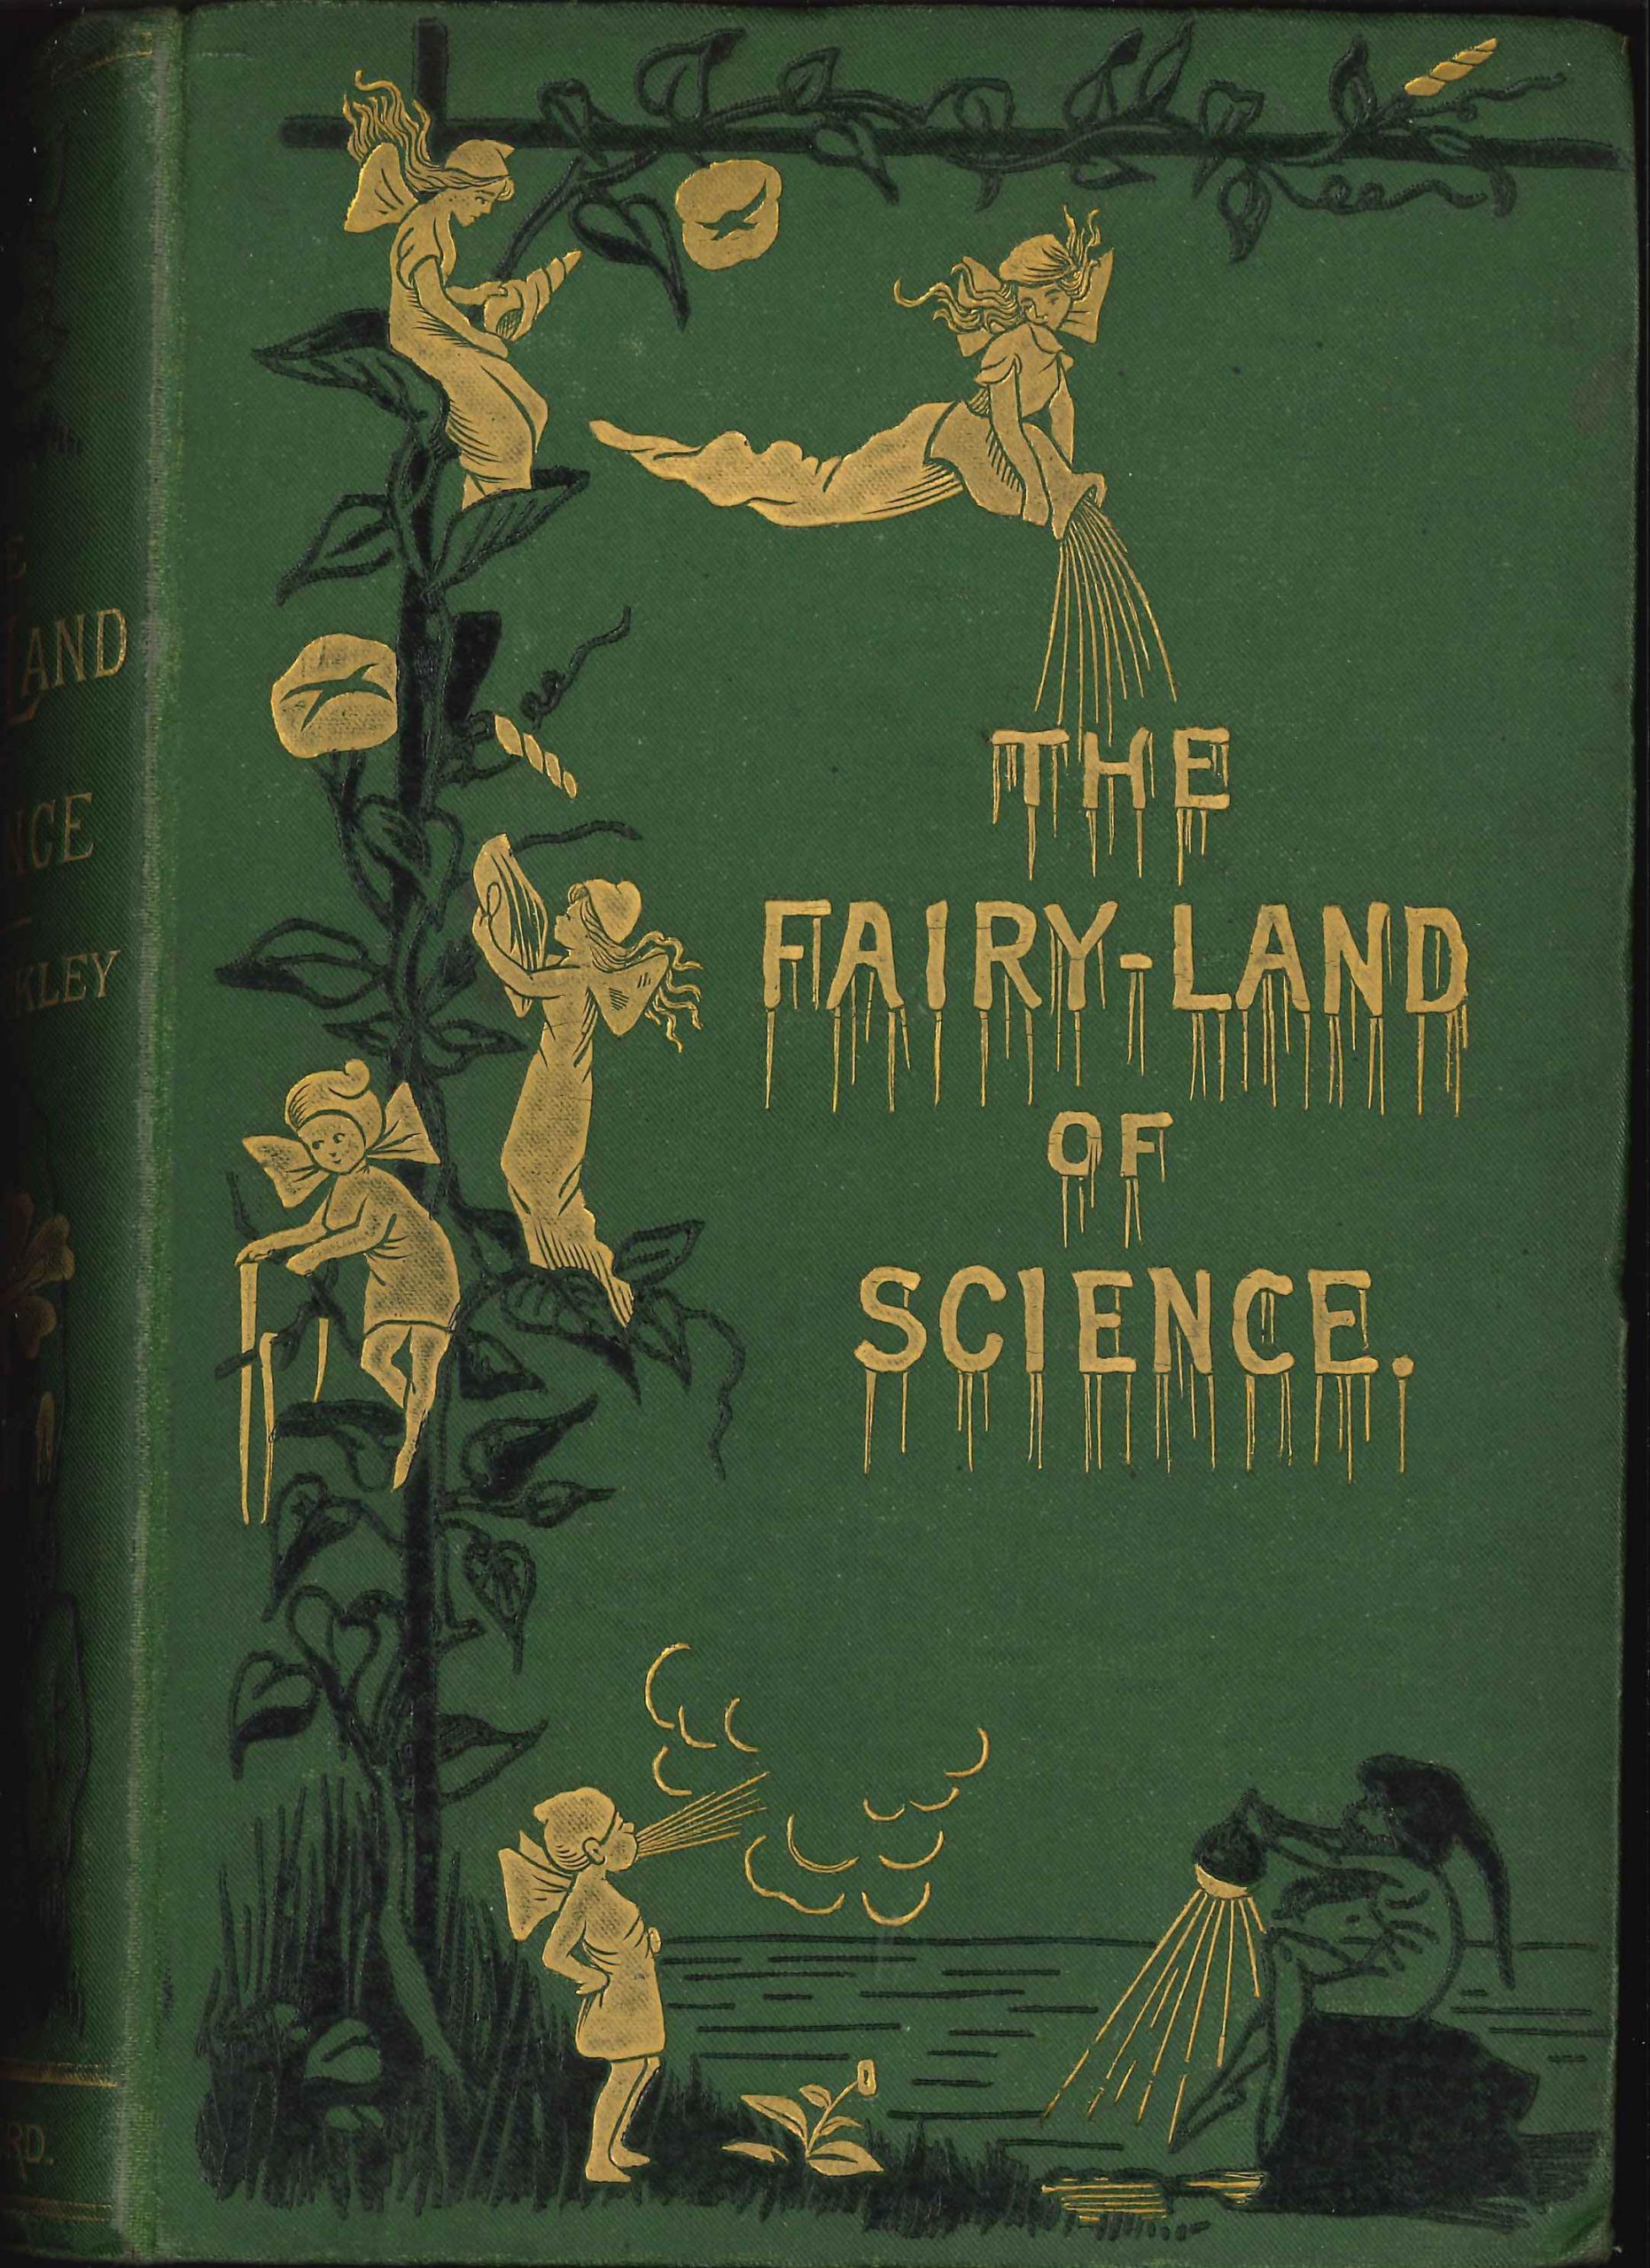 The fairy-land of science